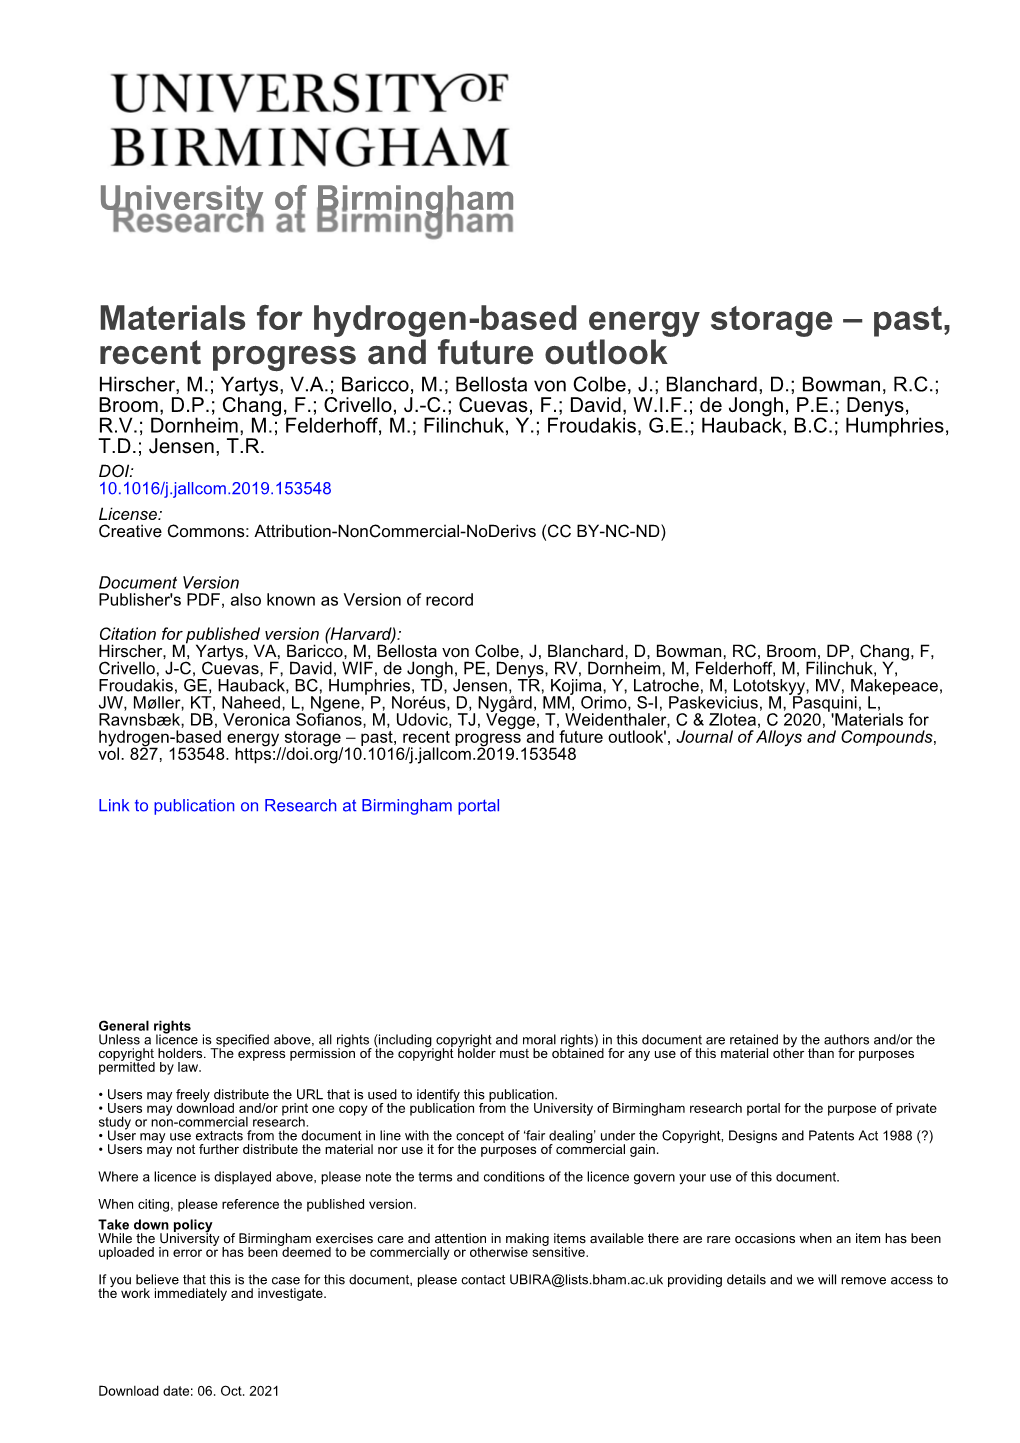 Materials for Hydrogen-Based Energy Storage